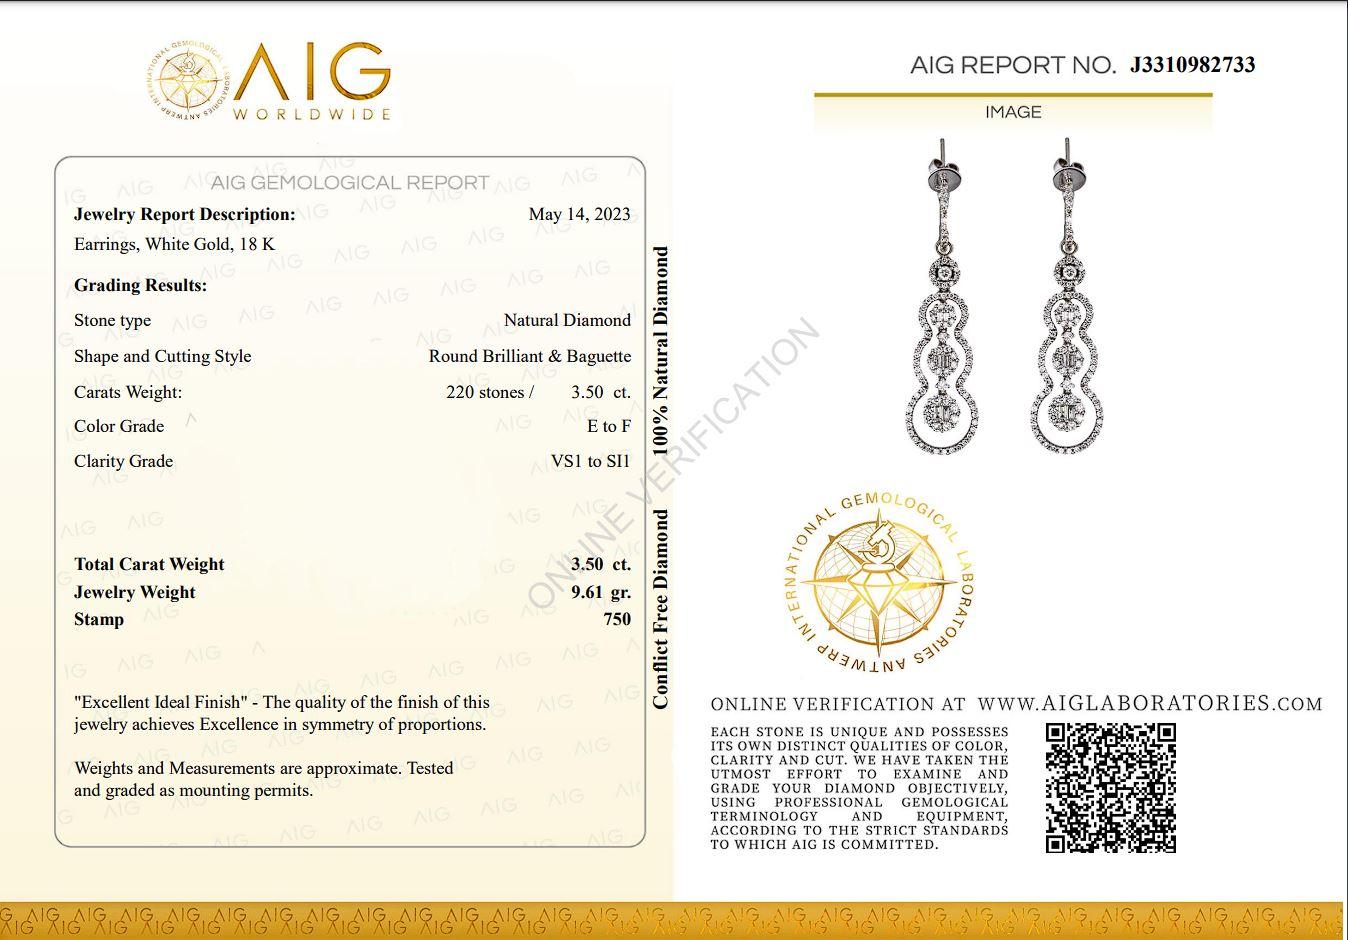 Beautiful drop earrings with dazzling 3.5 carat round brilliant and baguette diamonds. The jewelry is made of 18K White Gold with a high quality polish. It comes with an AIG certificate and a nice jewelry box.

220 diamonds main stone of 3.5